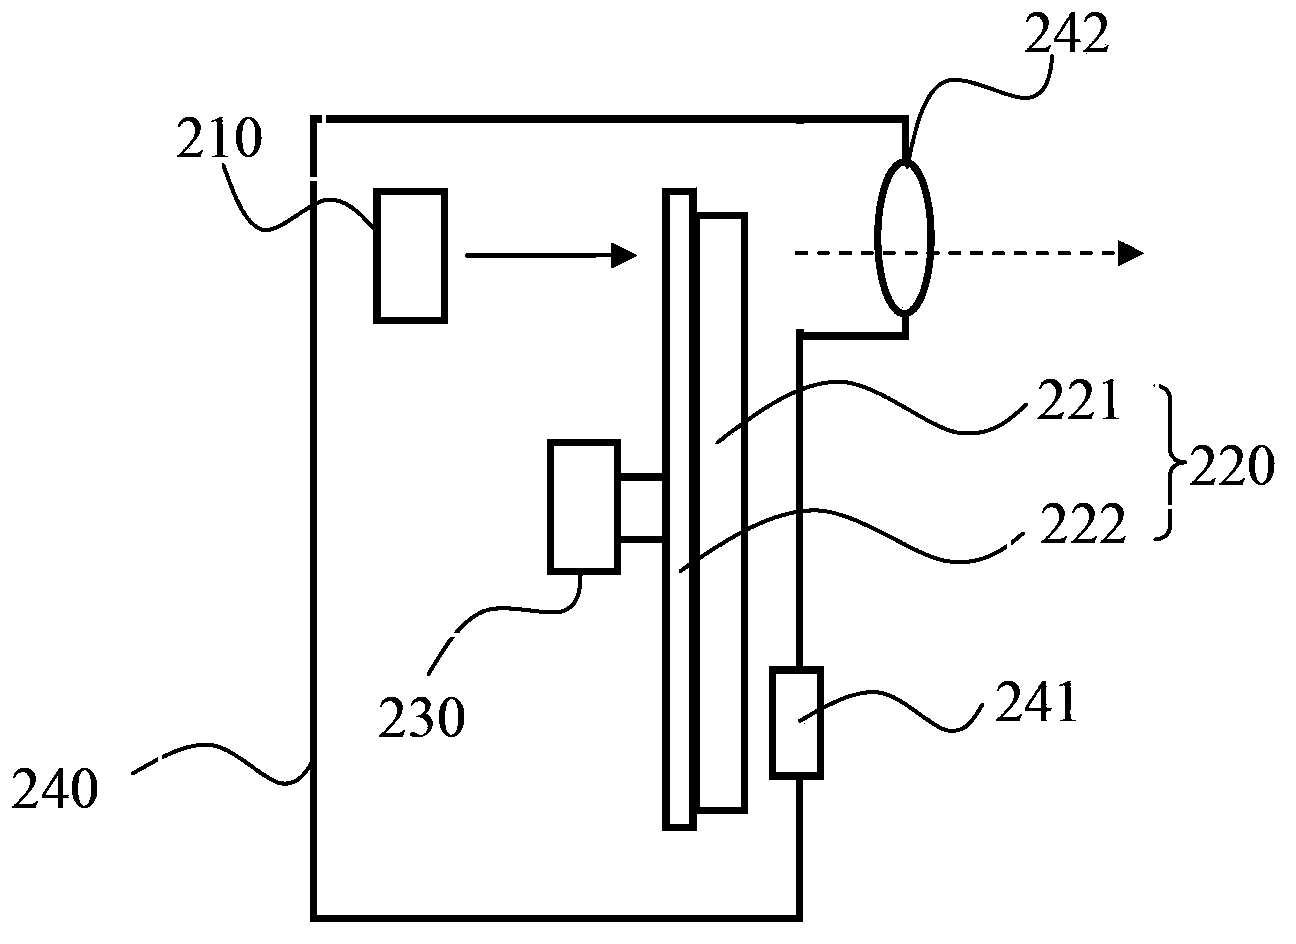 Light emitting device and related projection system